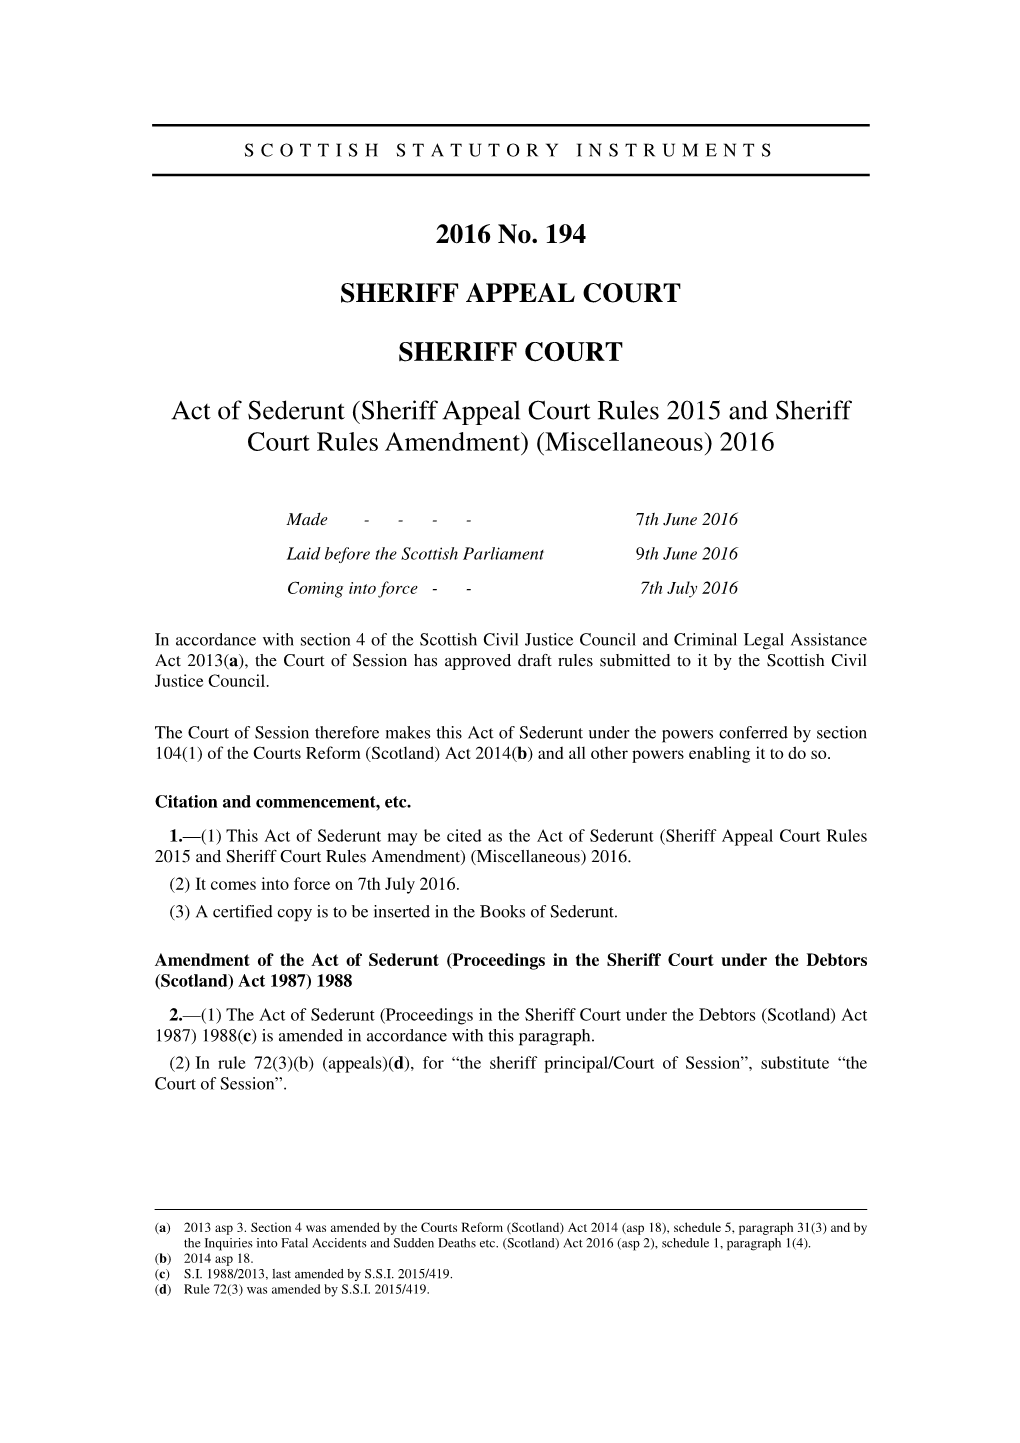 Act of Sederunt (Sheriff Appeal Court Rules 2015 and Sheriff Court Rules Amendment) (Miscellaneous) 2016